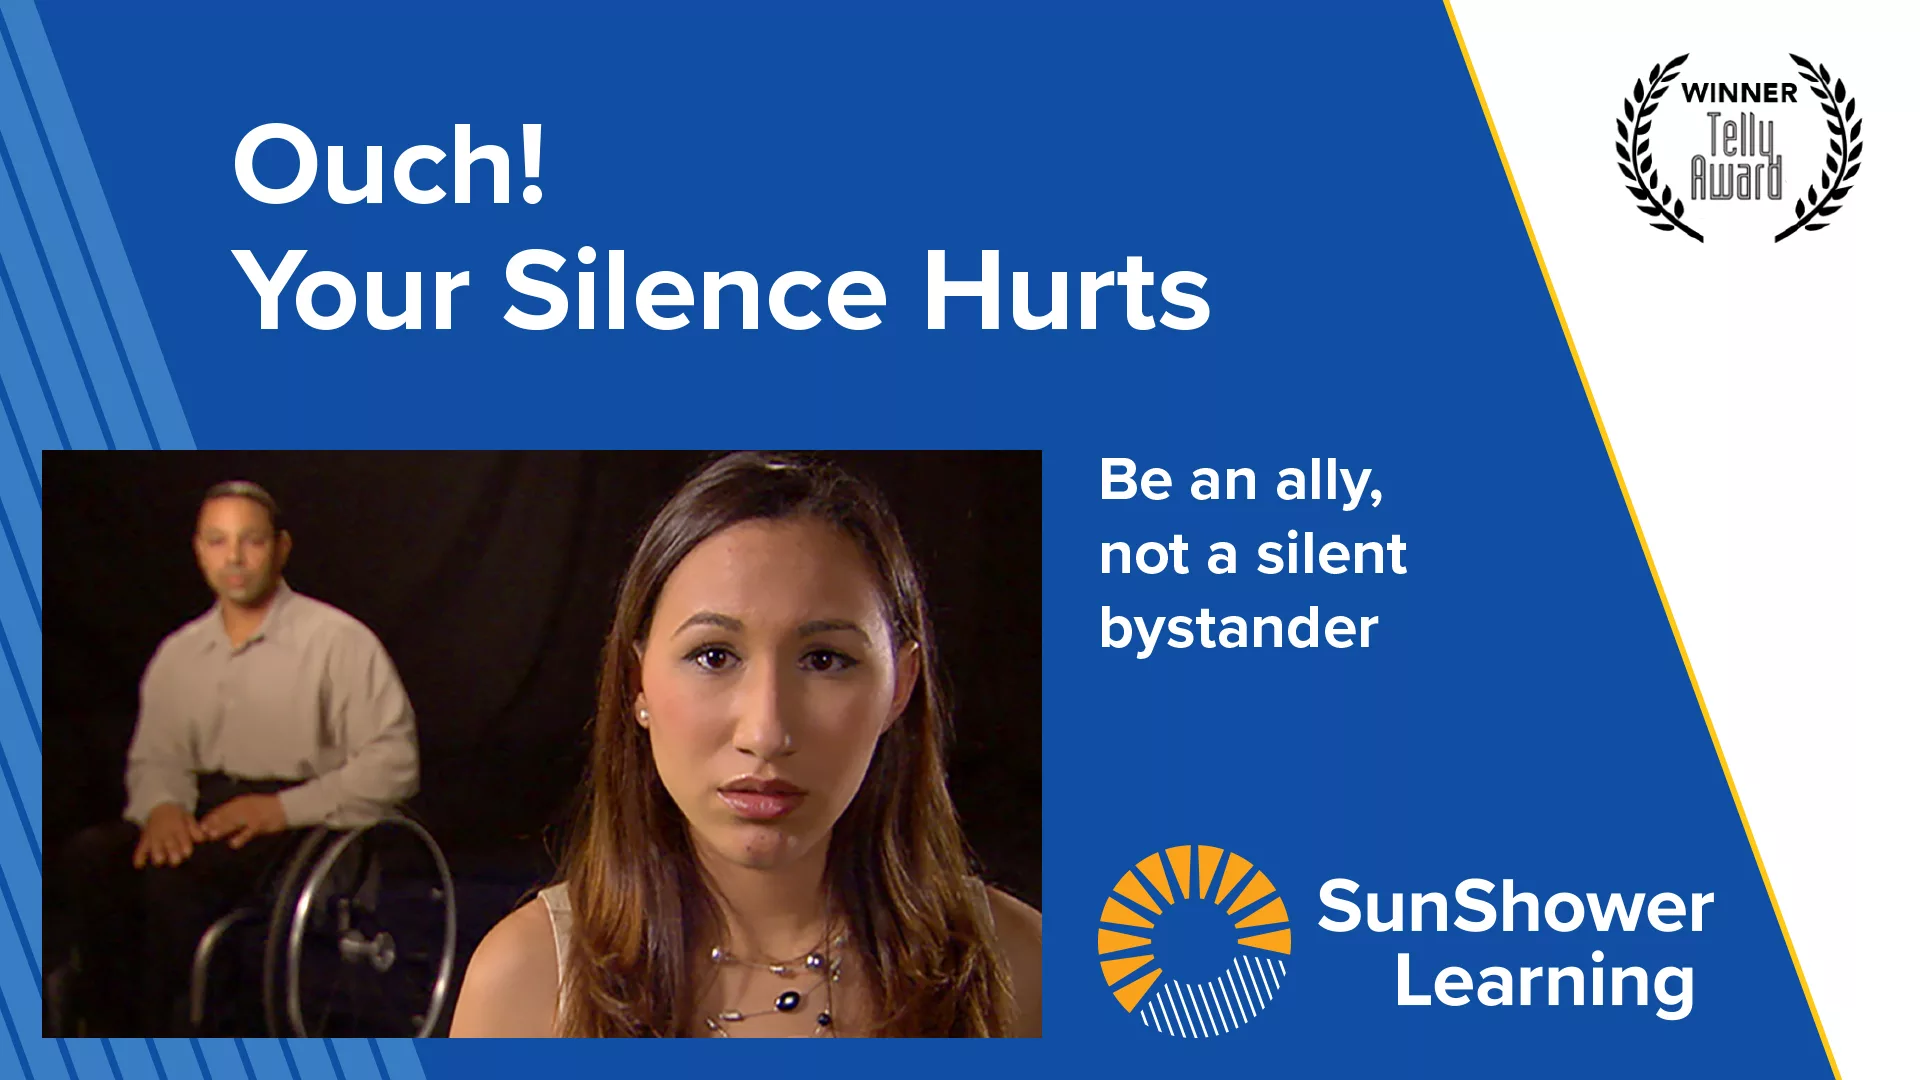 Thumbnail image with title, Ouch! Your Silence Hurts and text, Be an ally, not a silent bystander. Telly award seal.